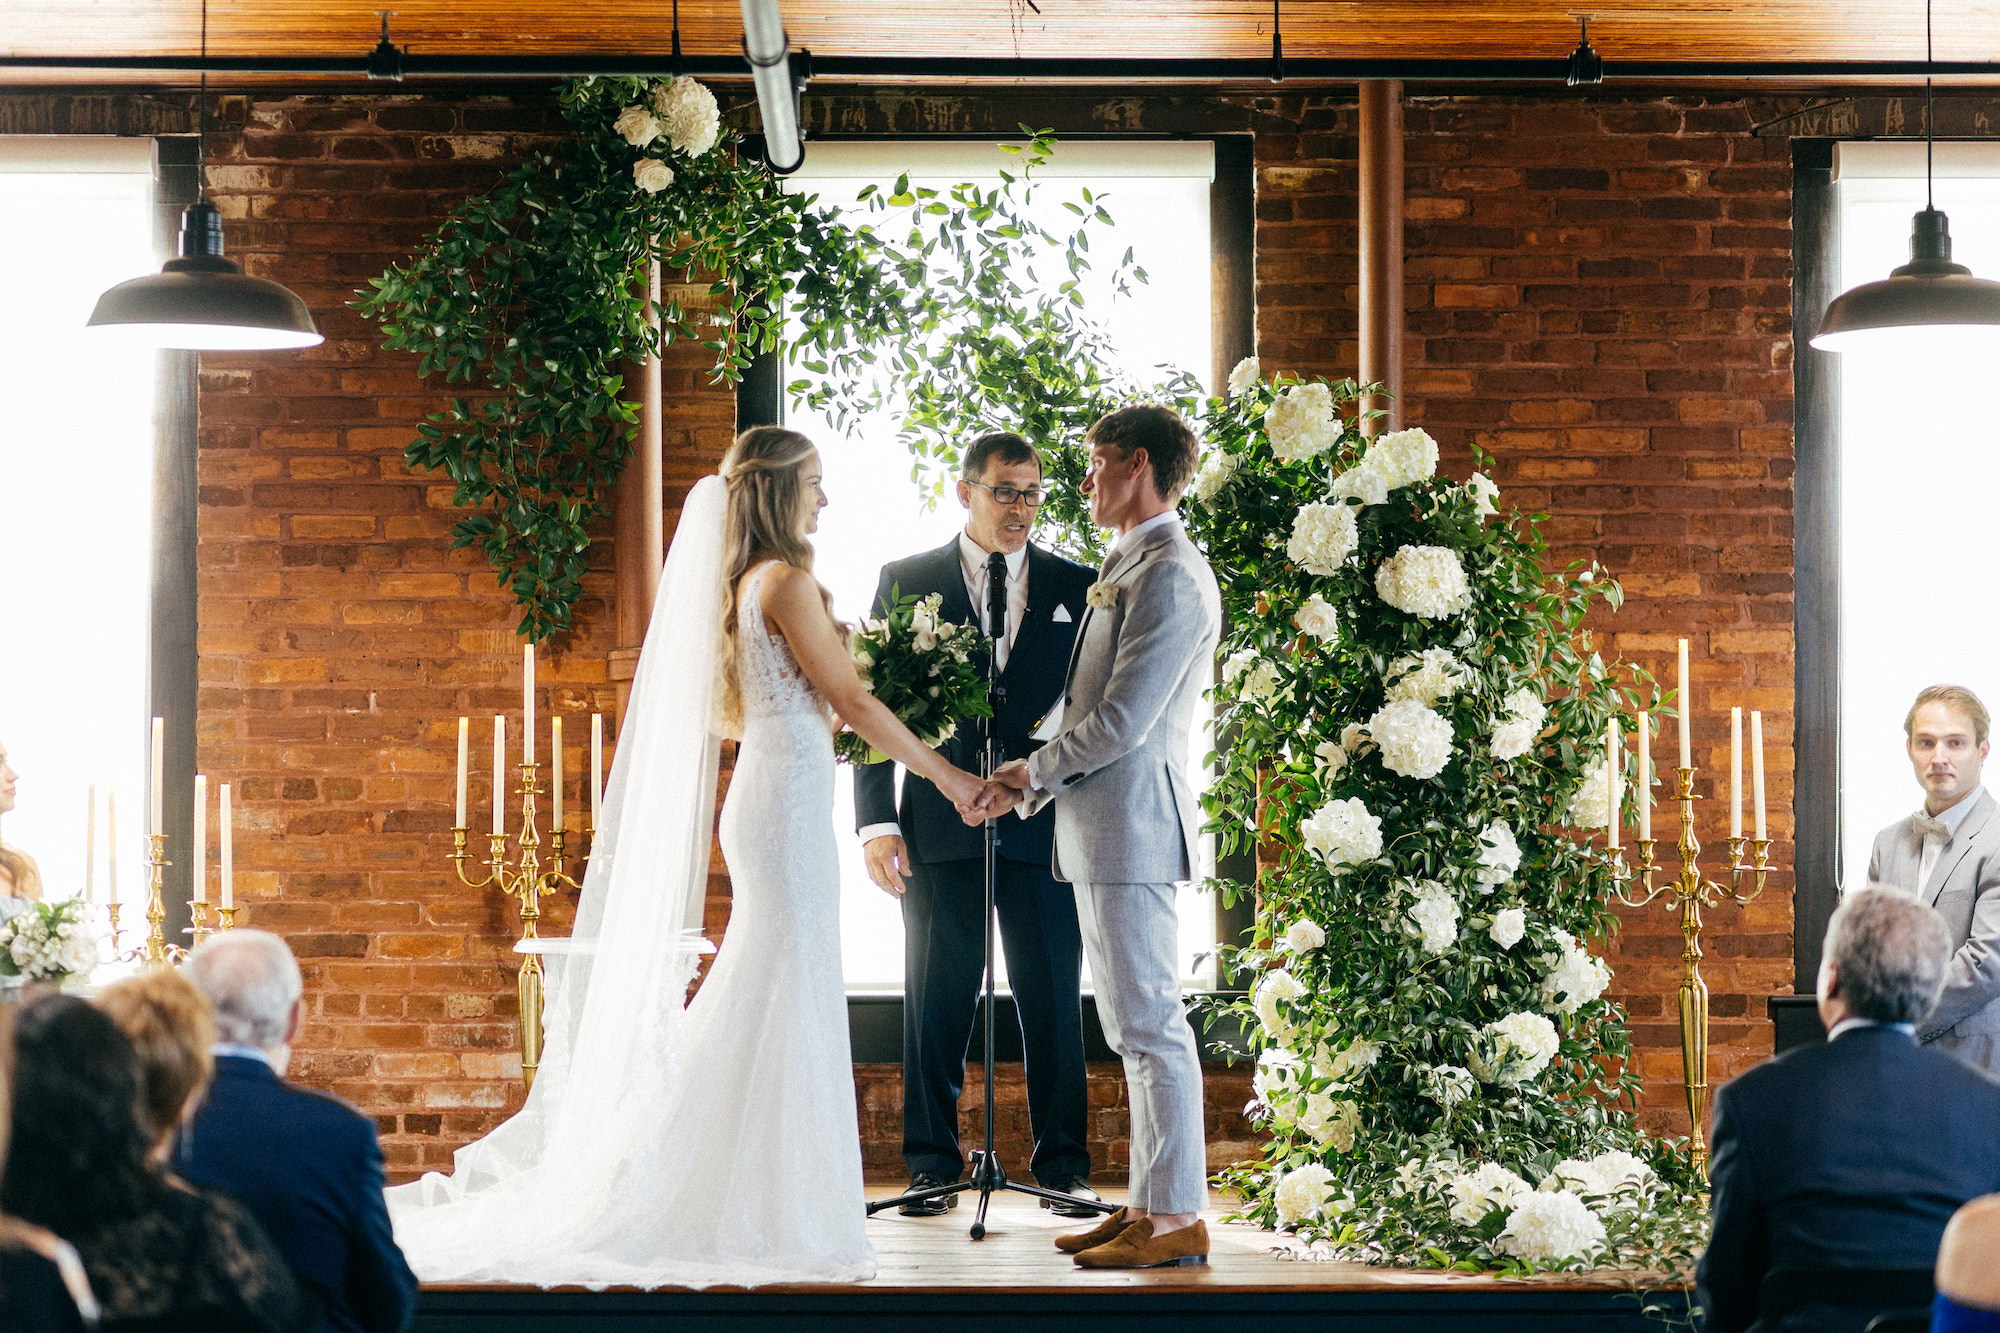 Bride and Groom Wedding Vows, Greenery Ceremony Arch with White Flowers| Tampa Bay Wedding Venue J.C. Newman Cigar Co. | Planner Parties A La Carte | Florist Bruce Wayne Florals